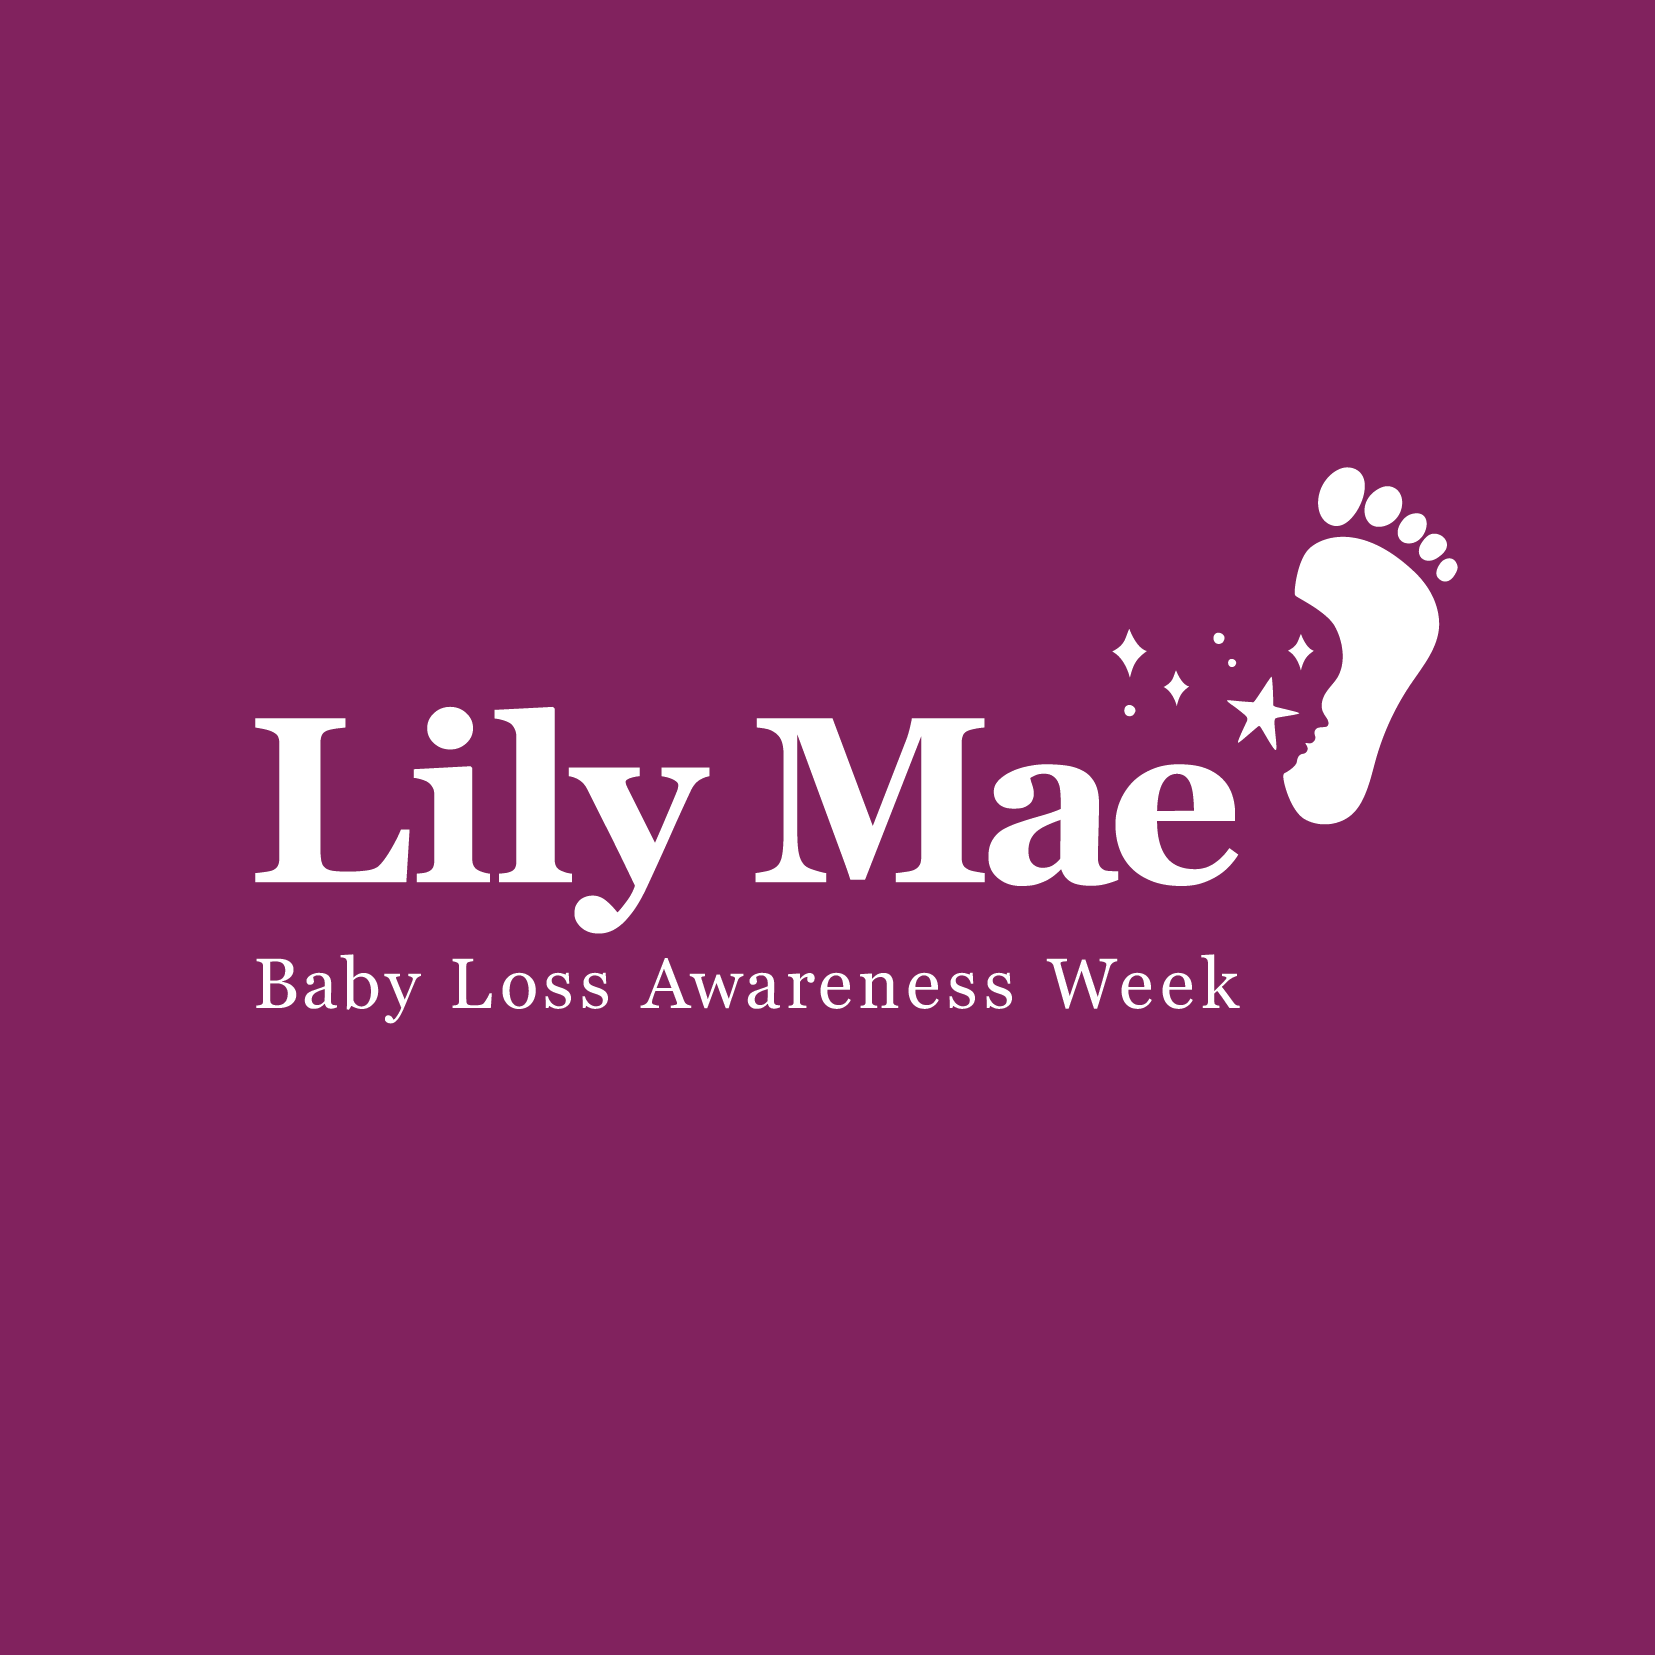 LMF LILY MAE BABYLOSS AWARENESS_AW3-03.png